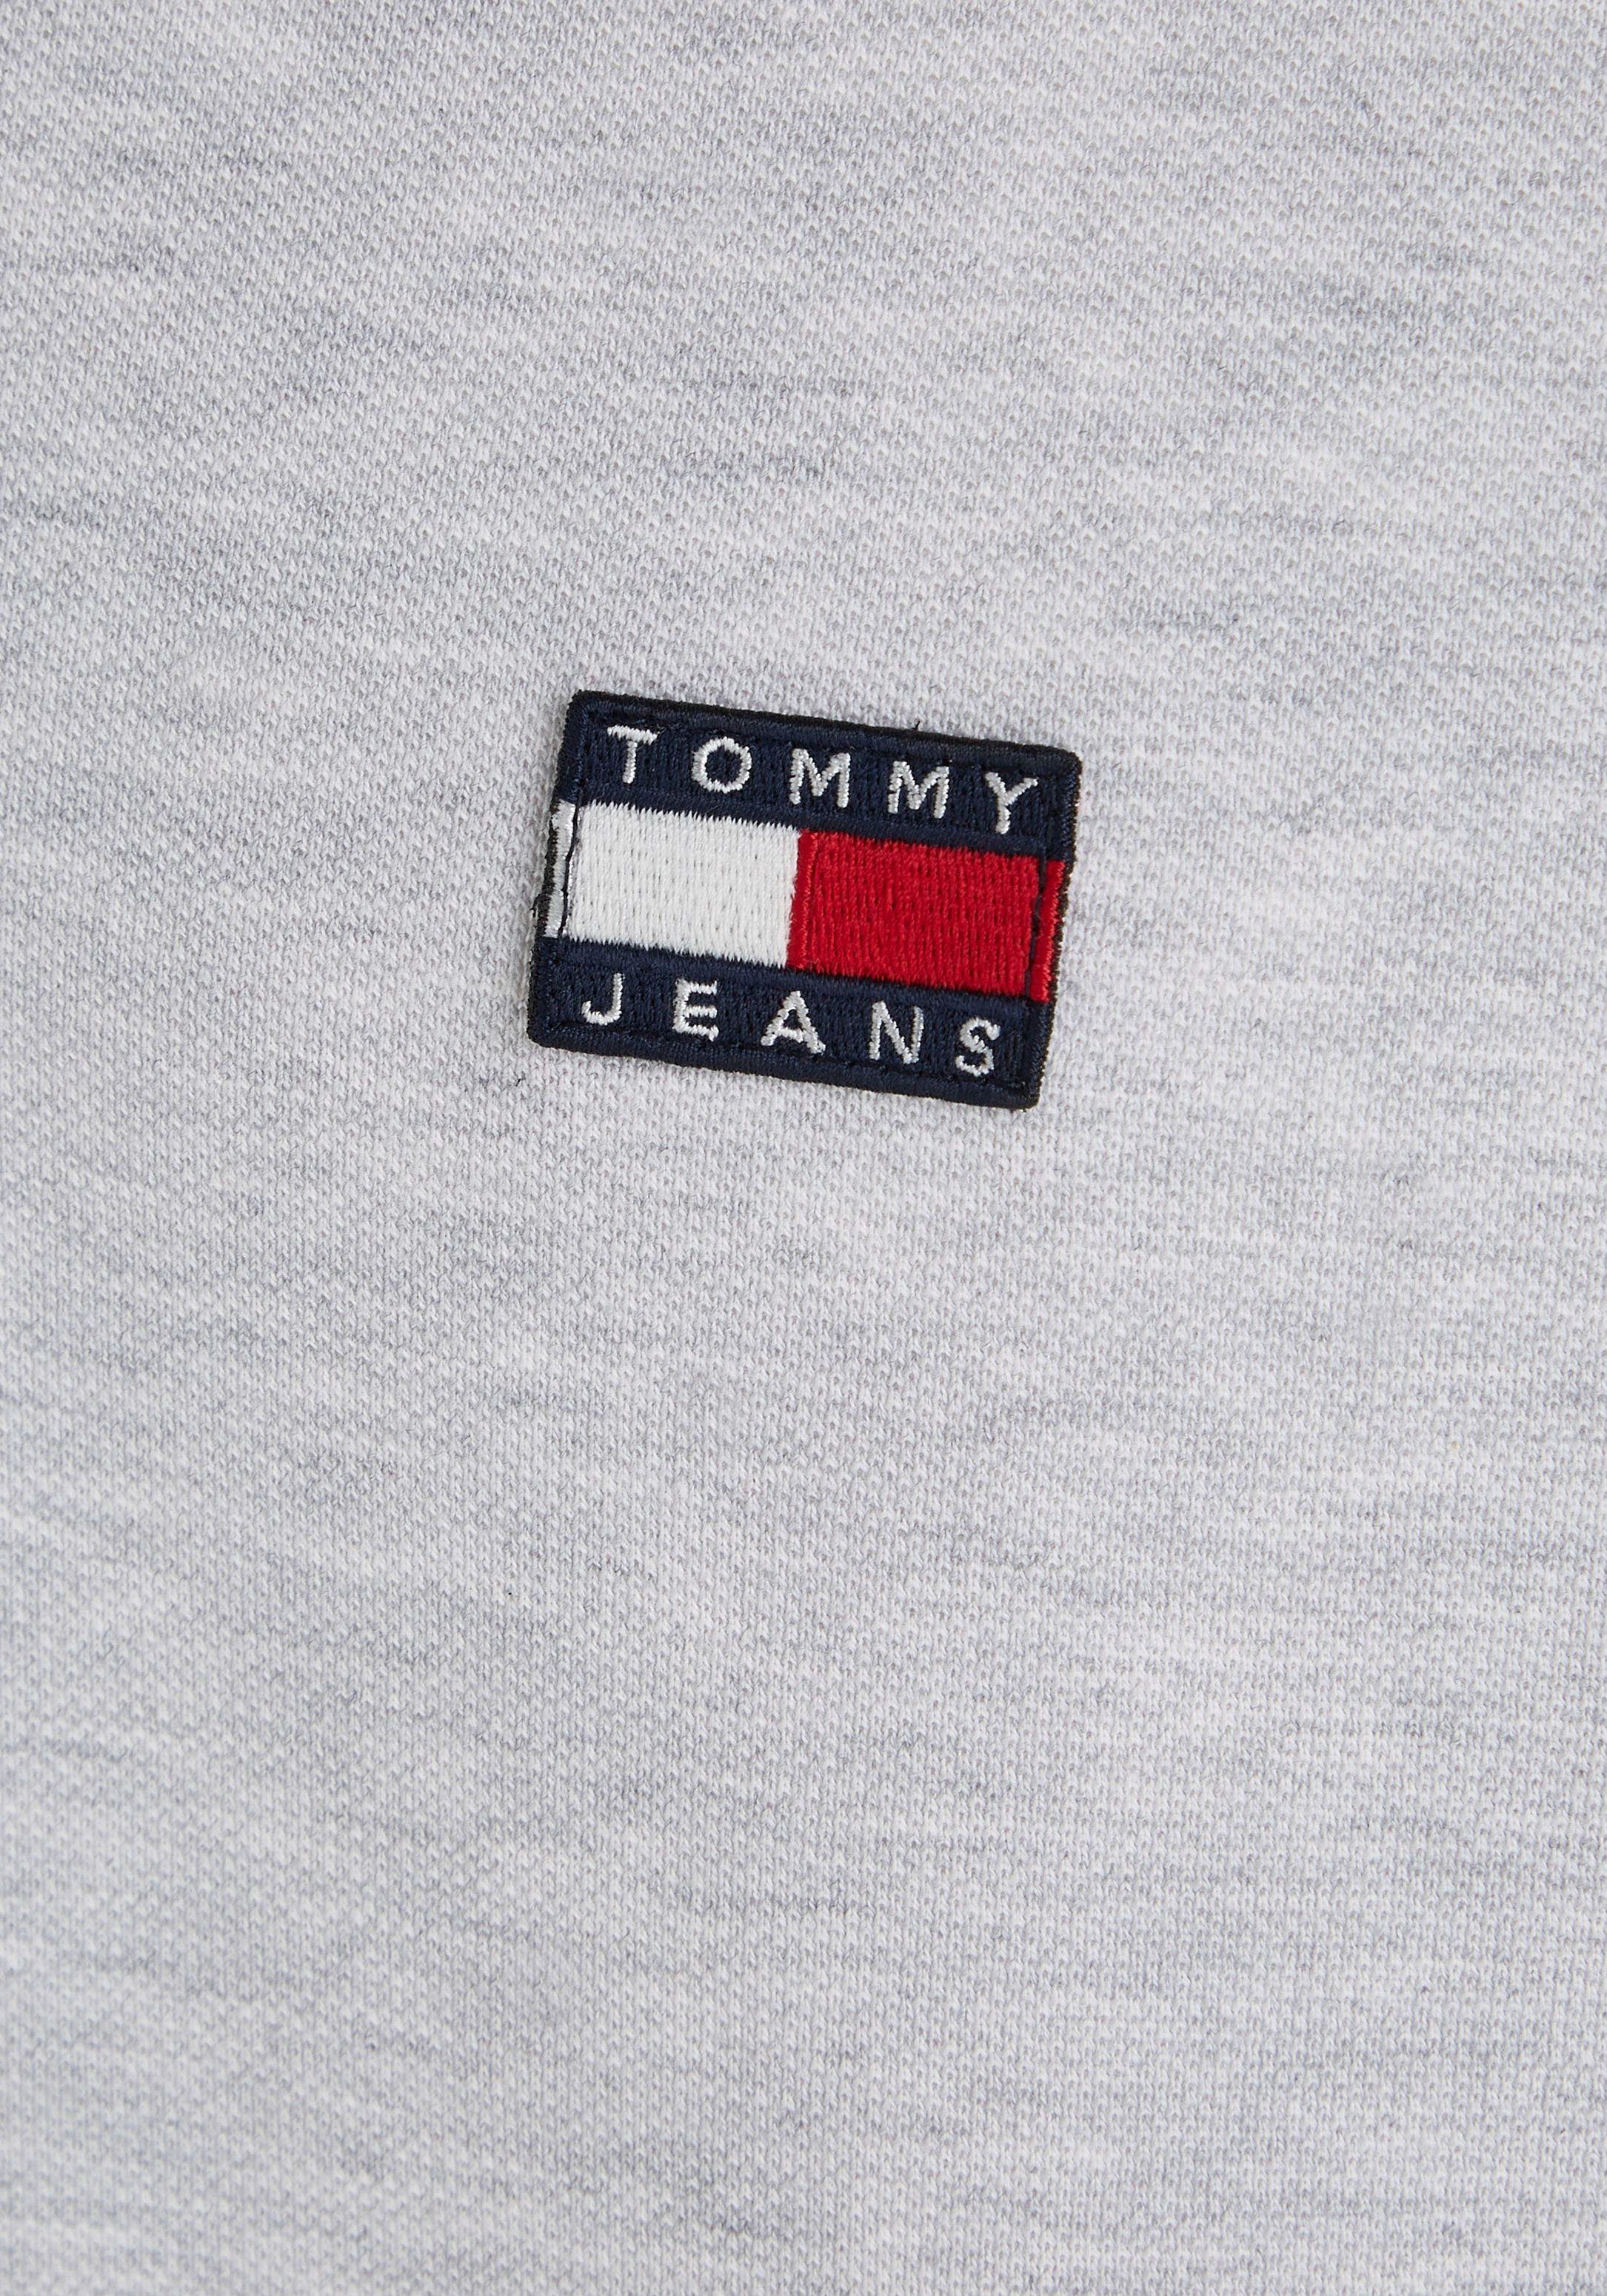 Jeans TJM Tommy Grey POLO Htr CLSC TIPPING Poloshirt DETAIL Silver